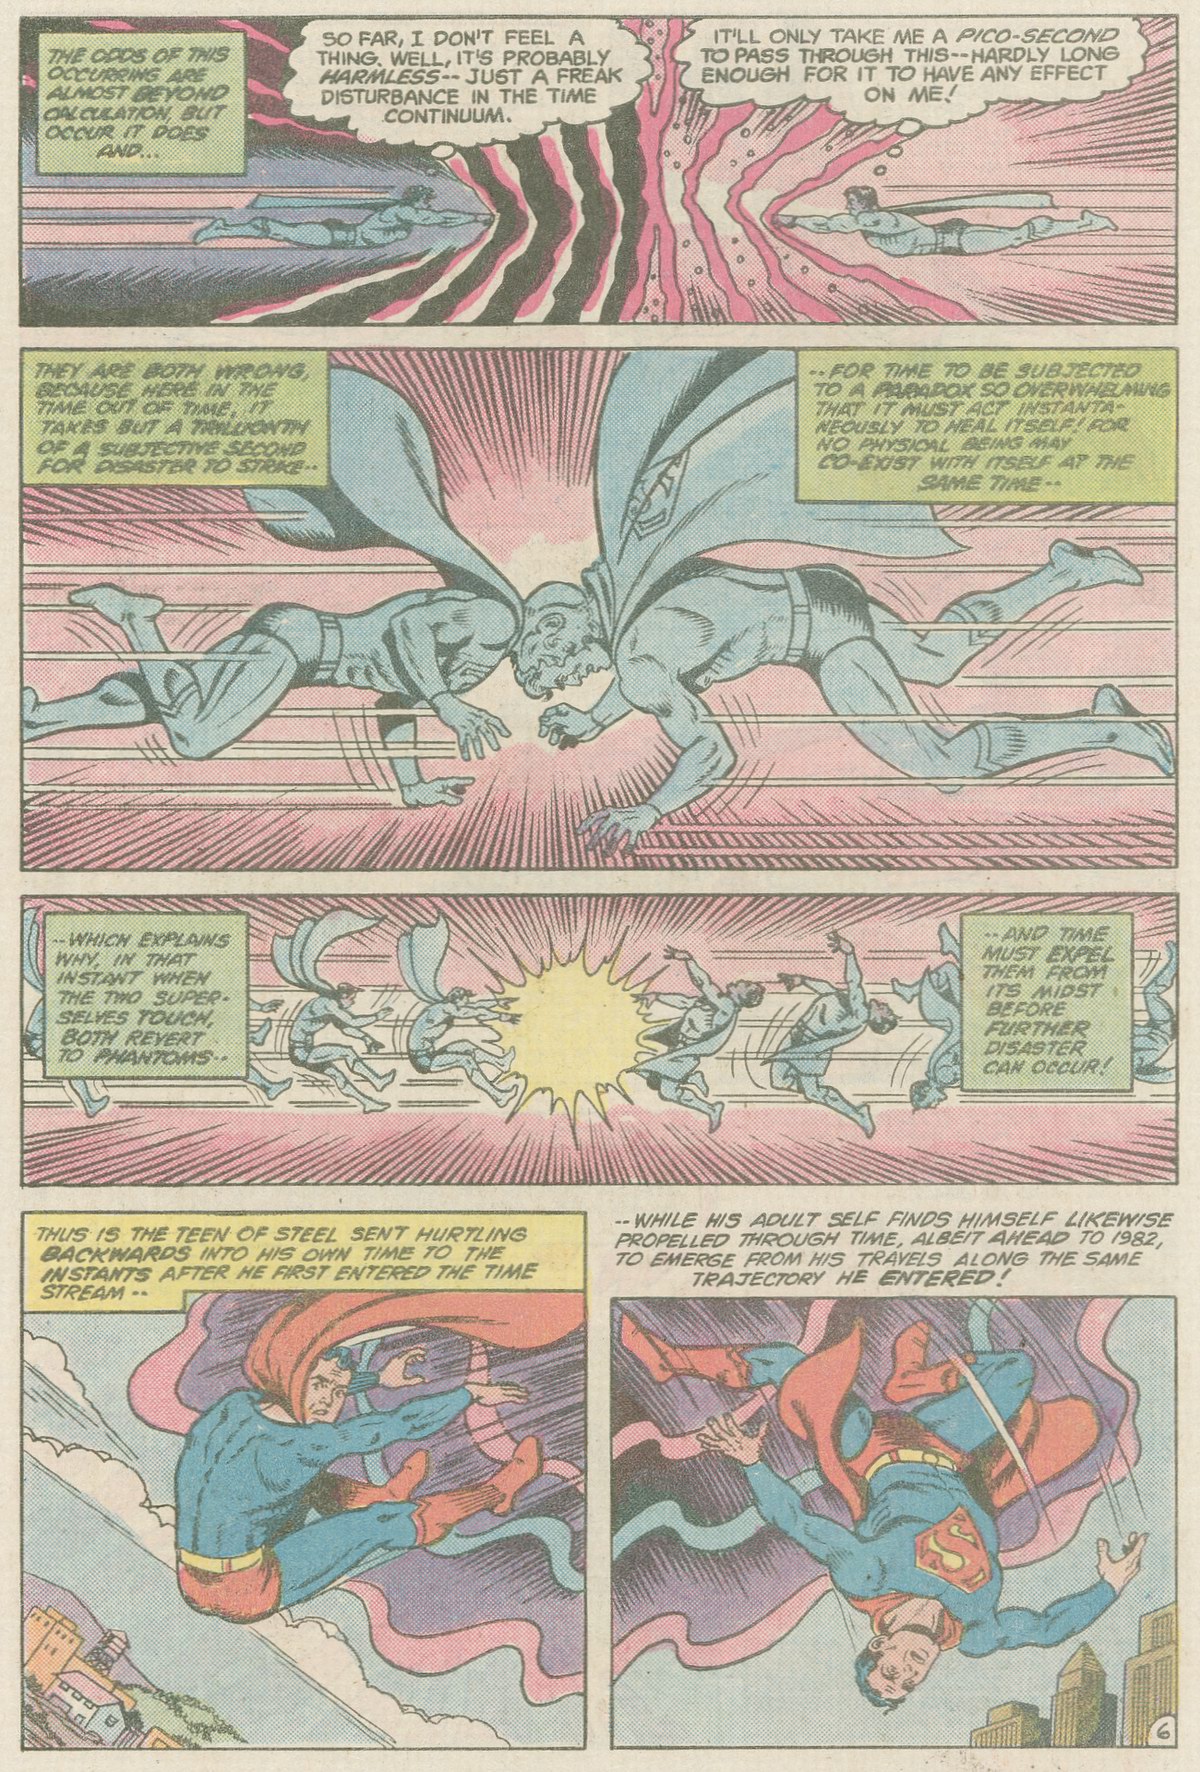 The New Adventures of Superboy 38 Page 6